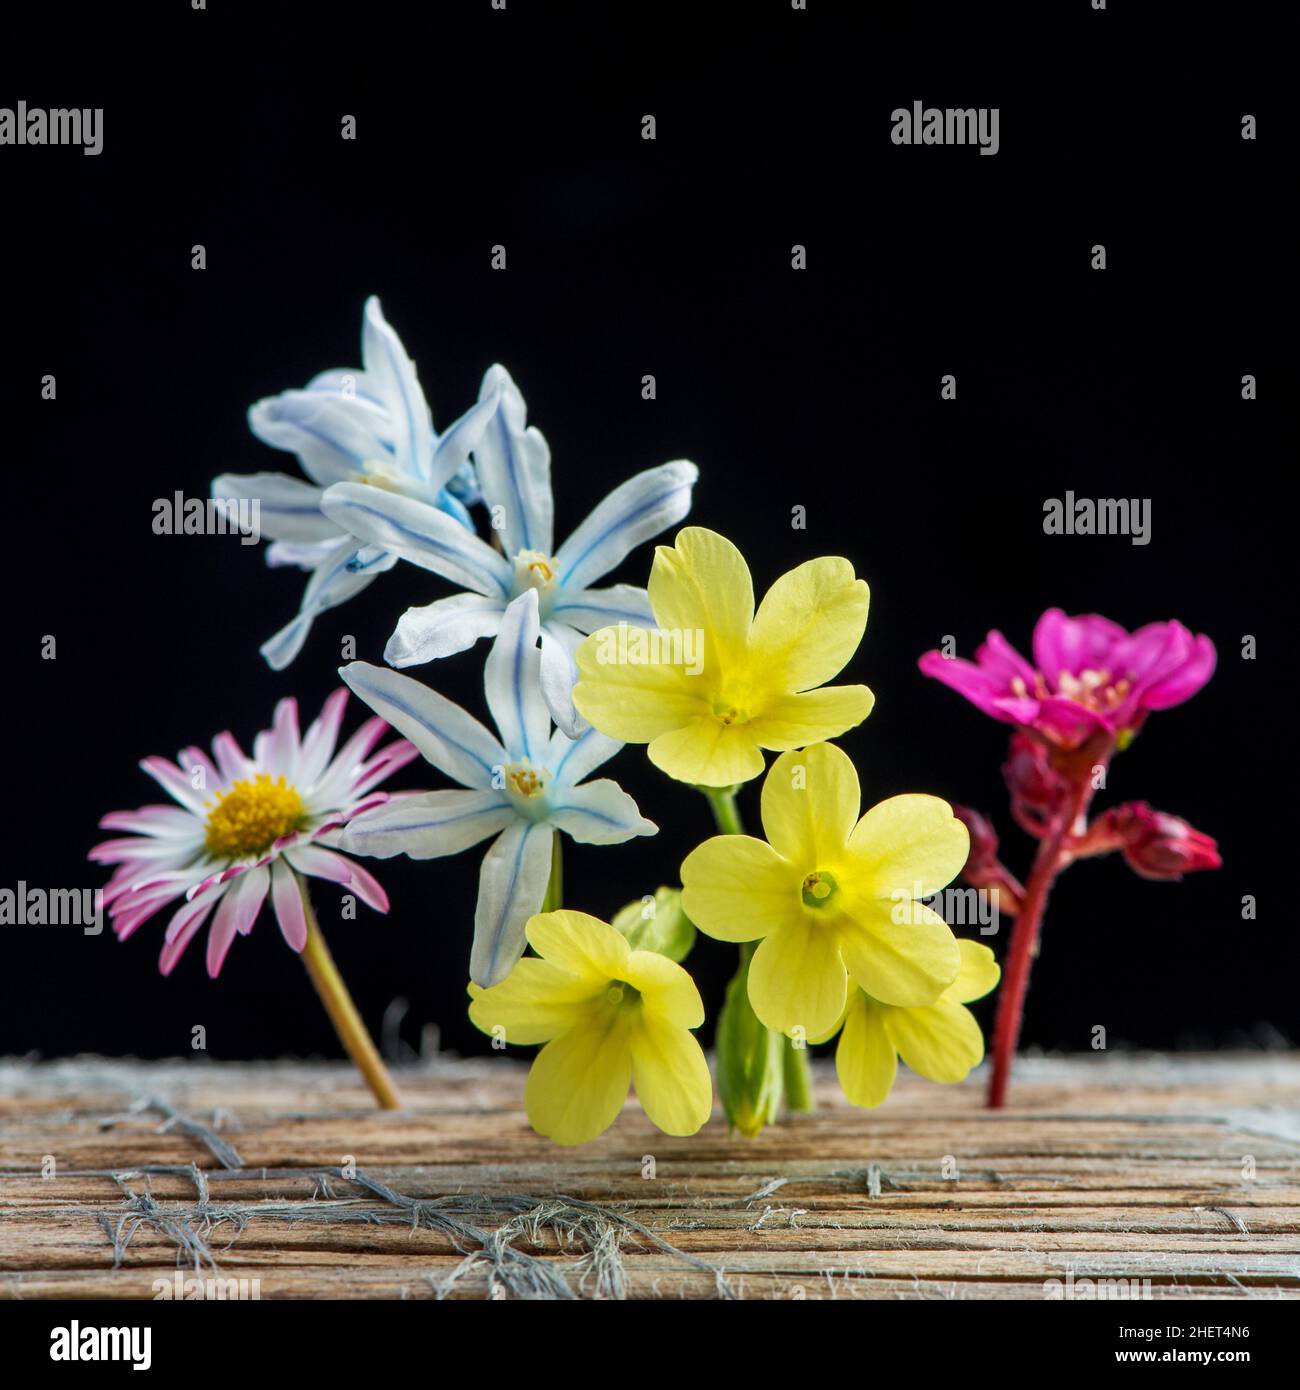 several spring garden flowers on wood and black background Stock Photo